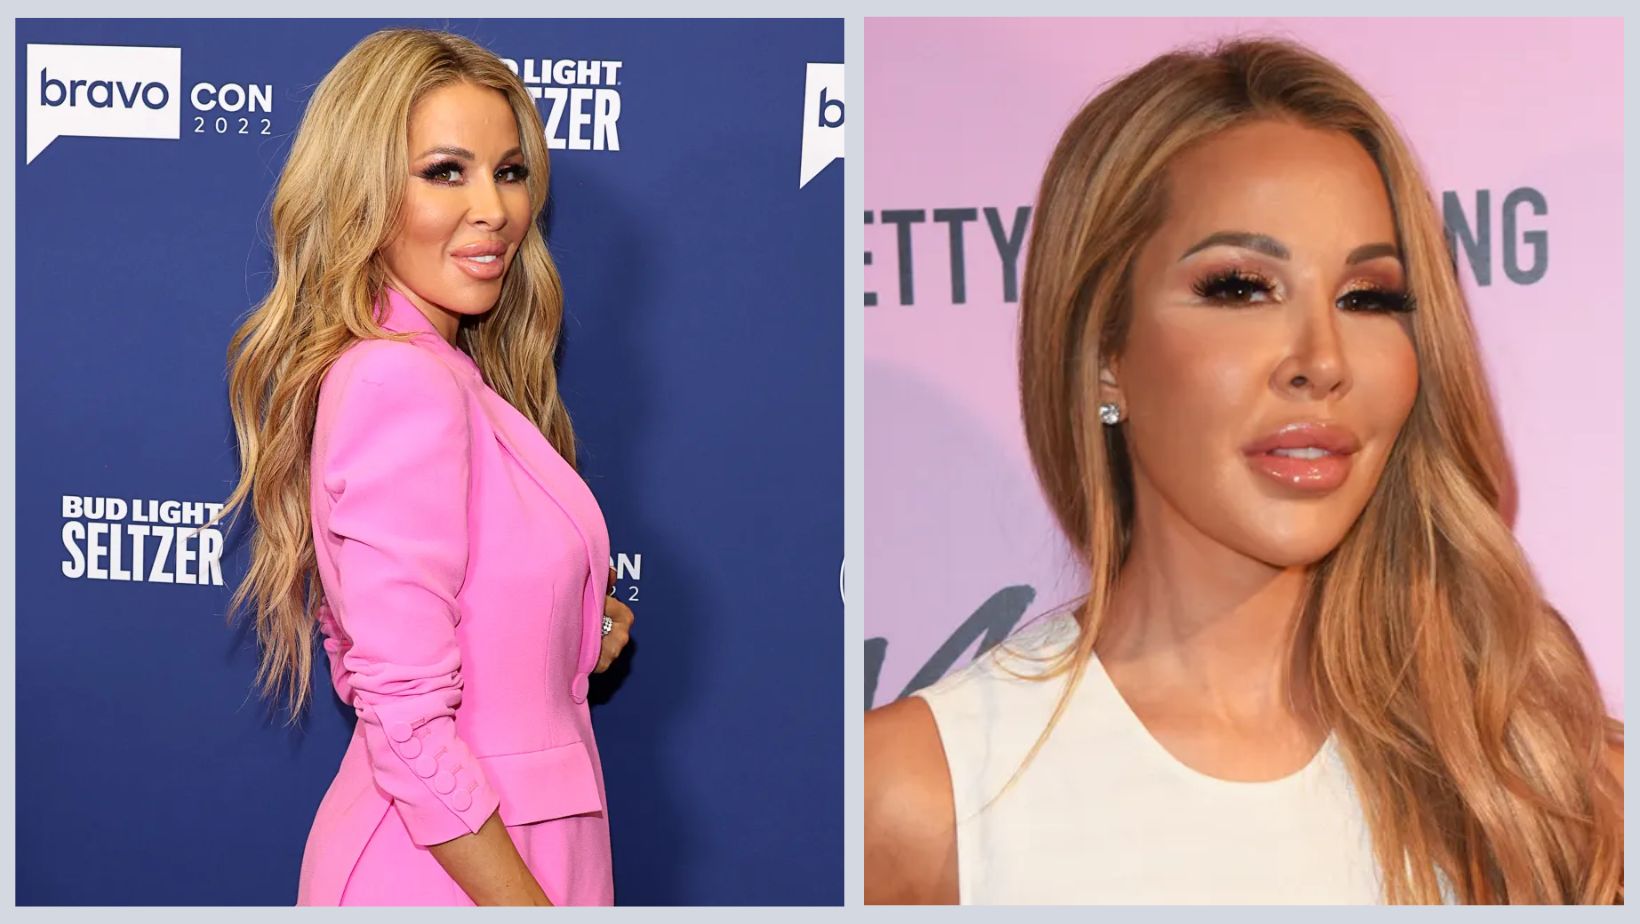 Lisa Hochstein Parents And Ethnicity: Who Are They?